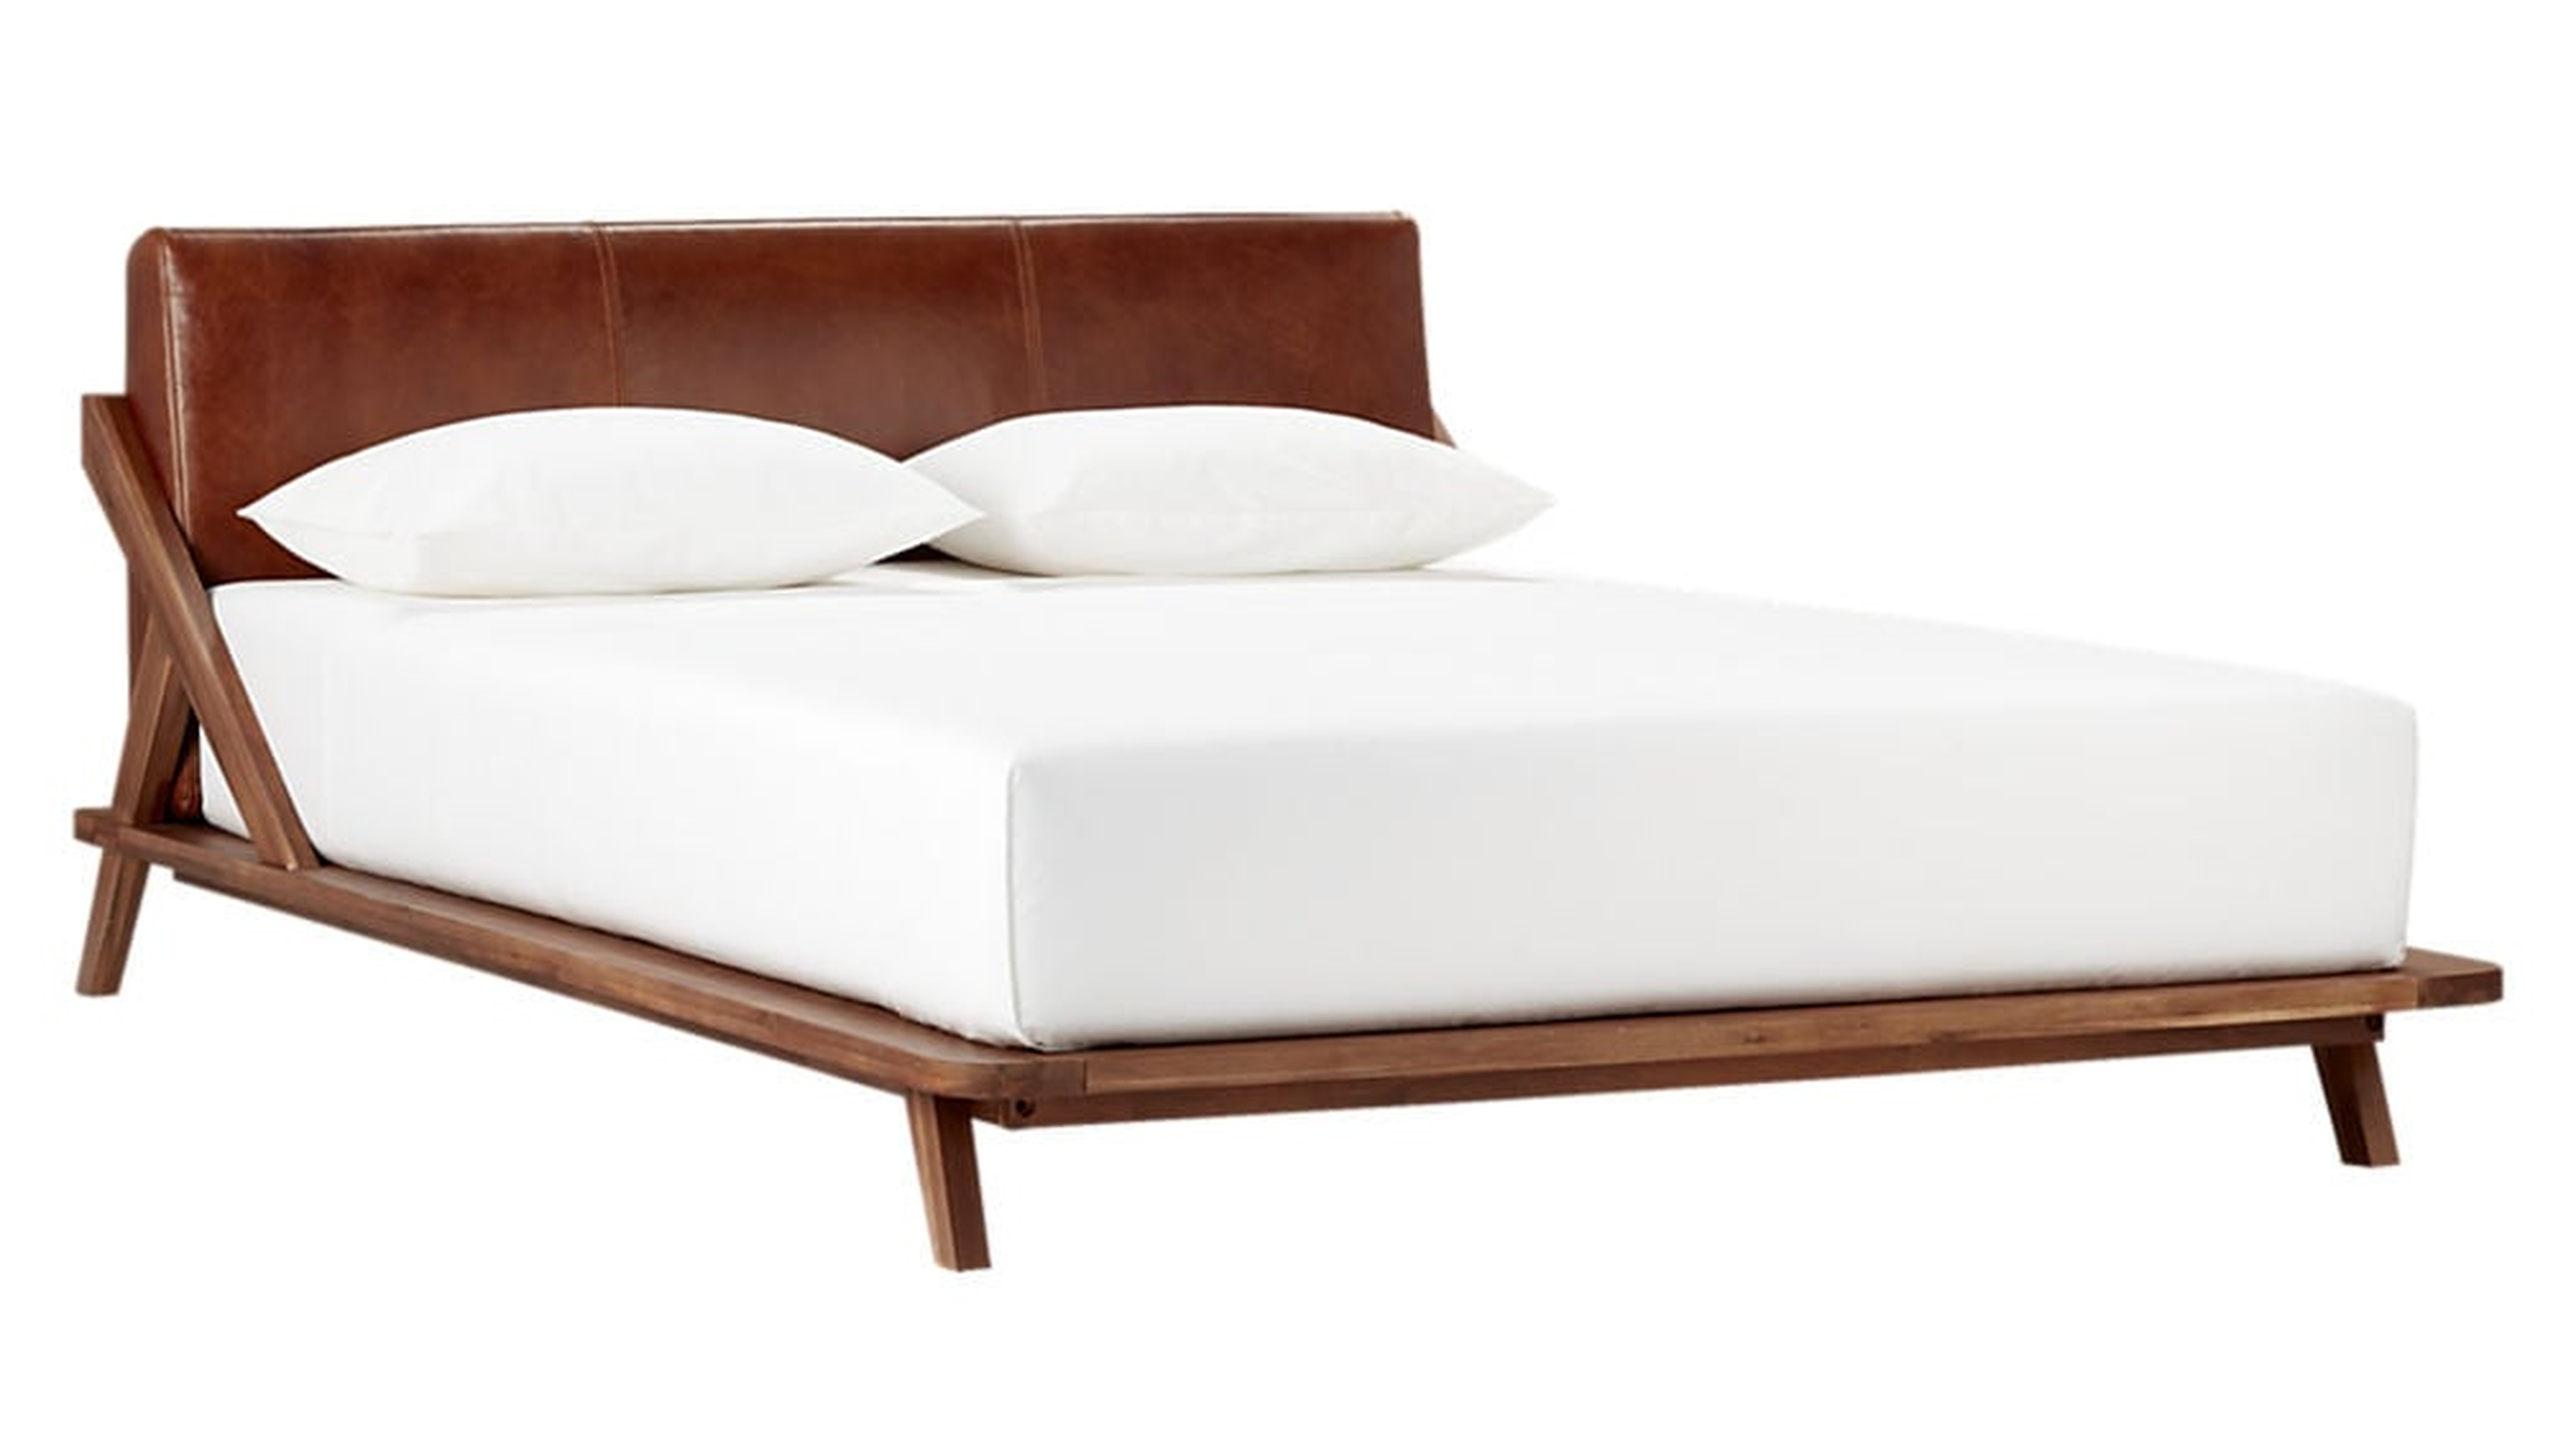 DROMMEN ACACIA KING BED WITH LEATHER HEADBOARD - CB2